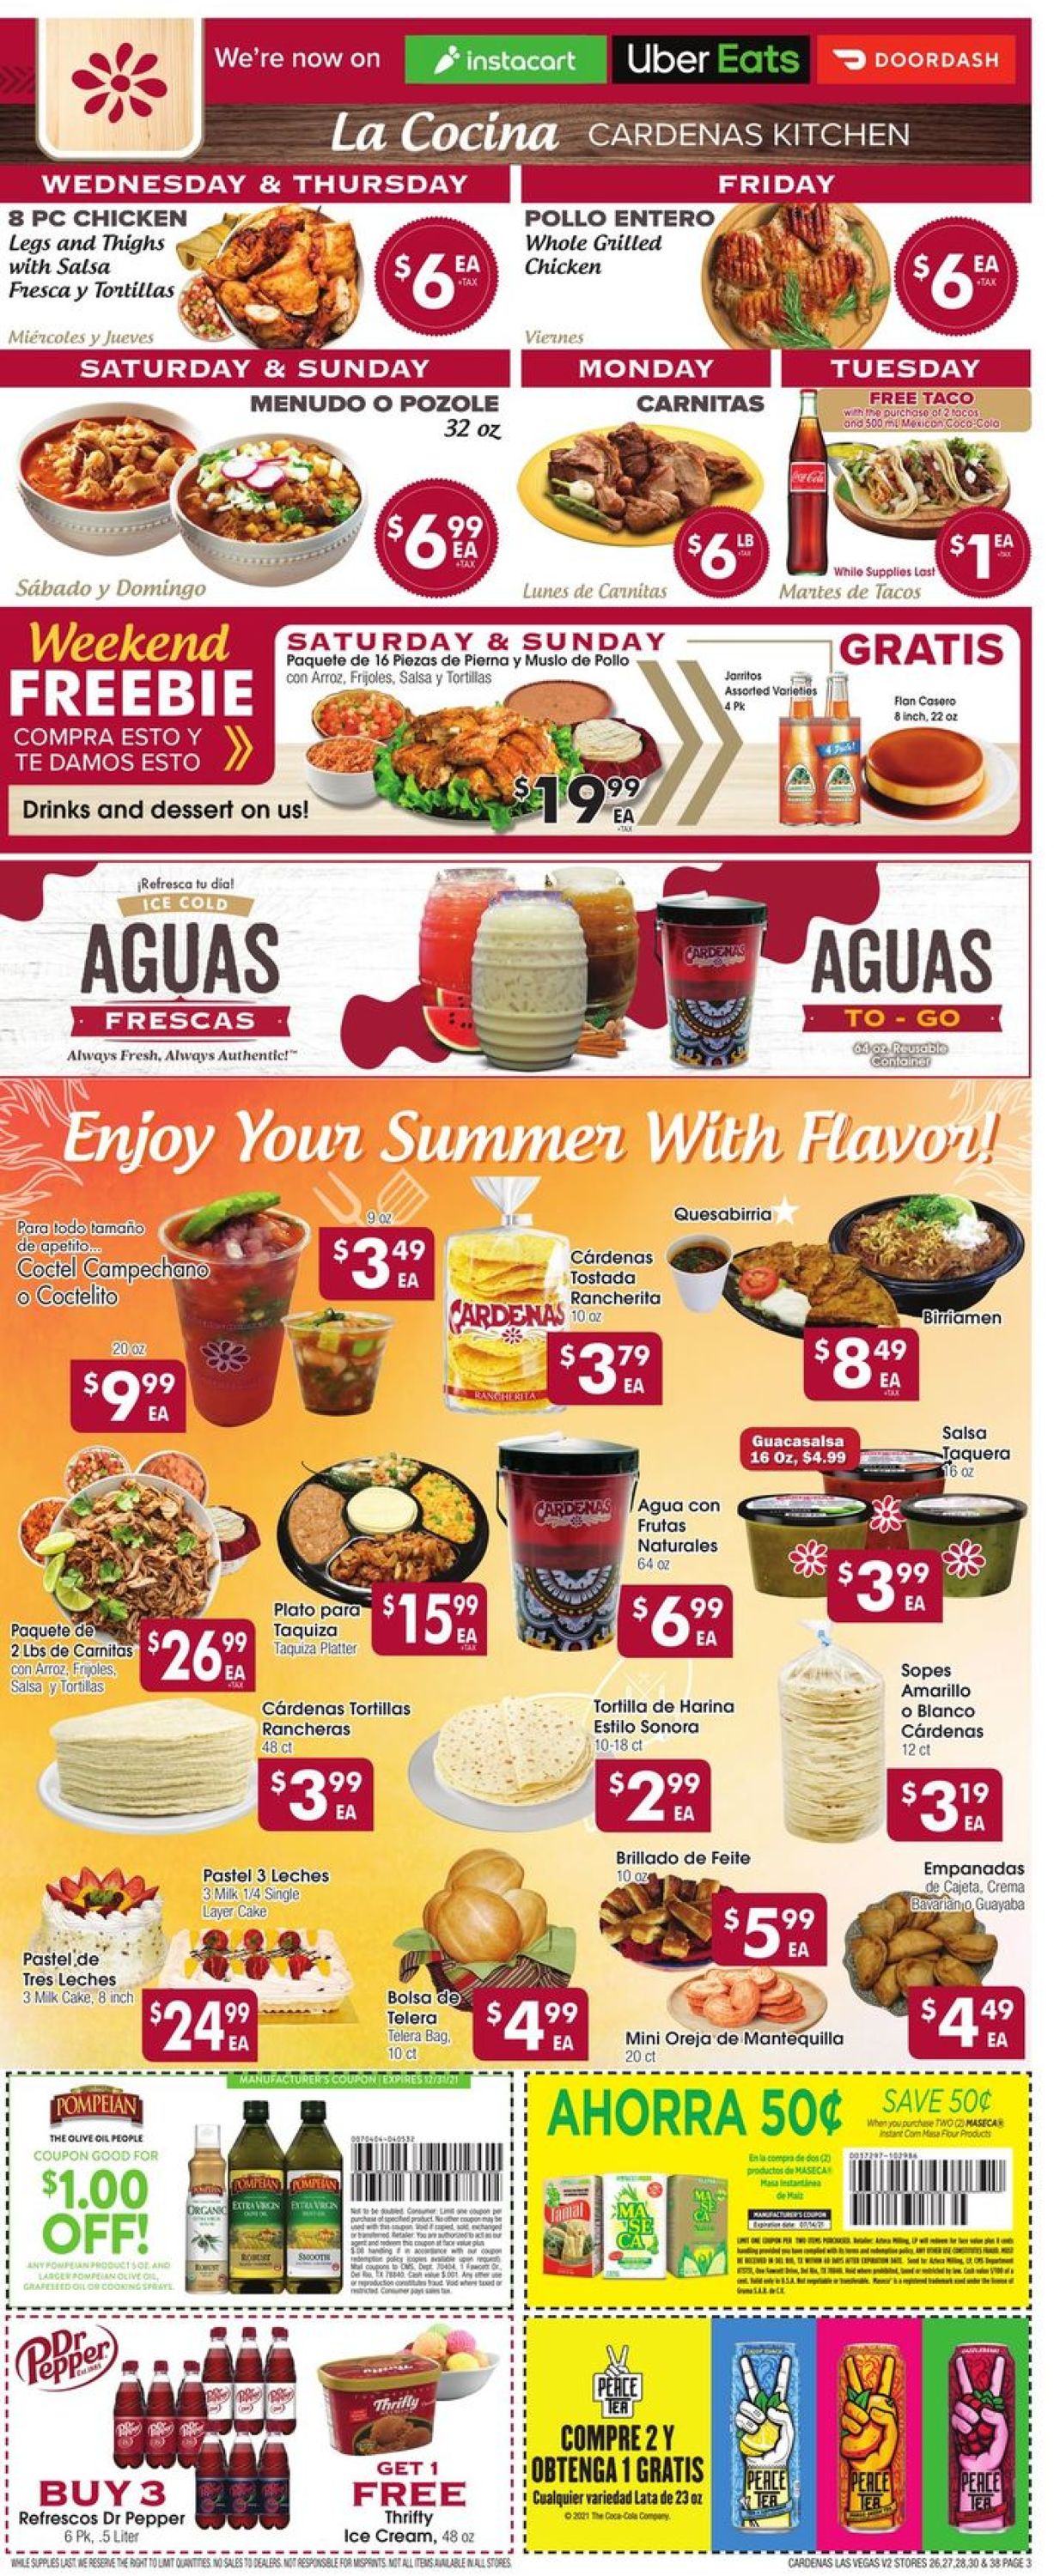 Cardenas Ad from 07/07/2021